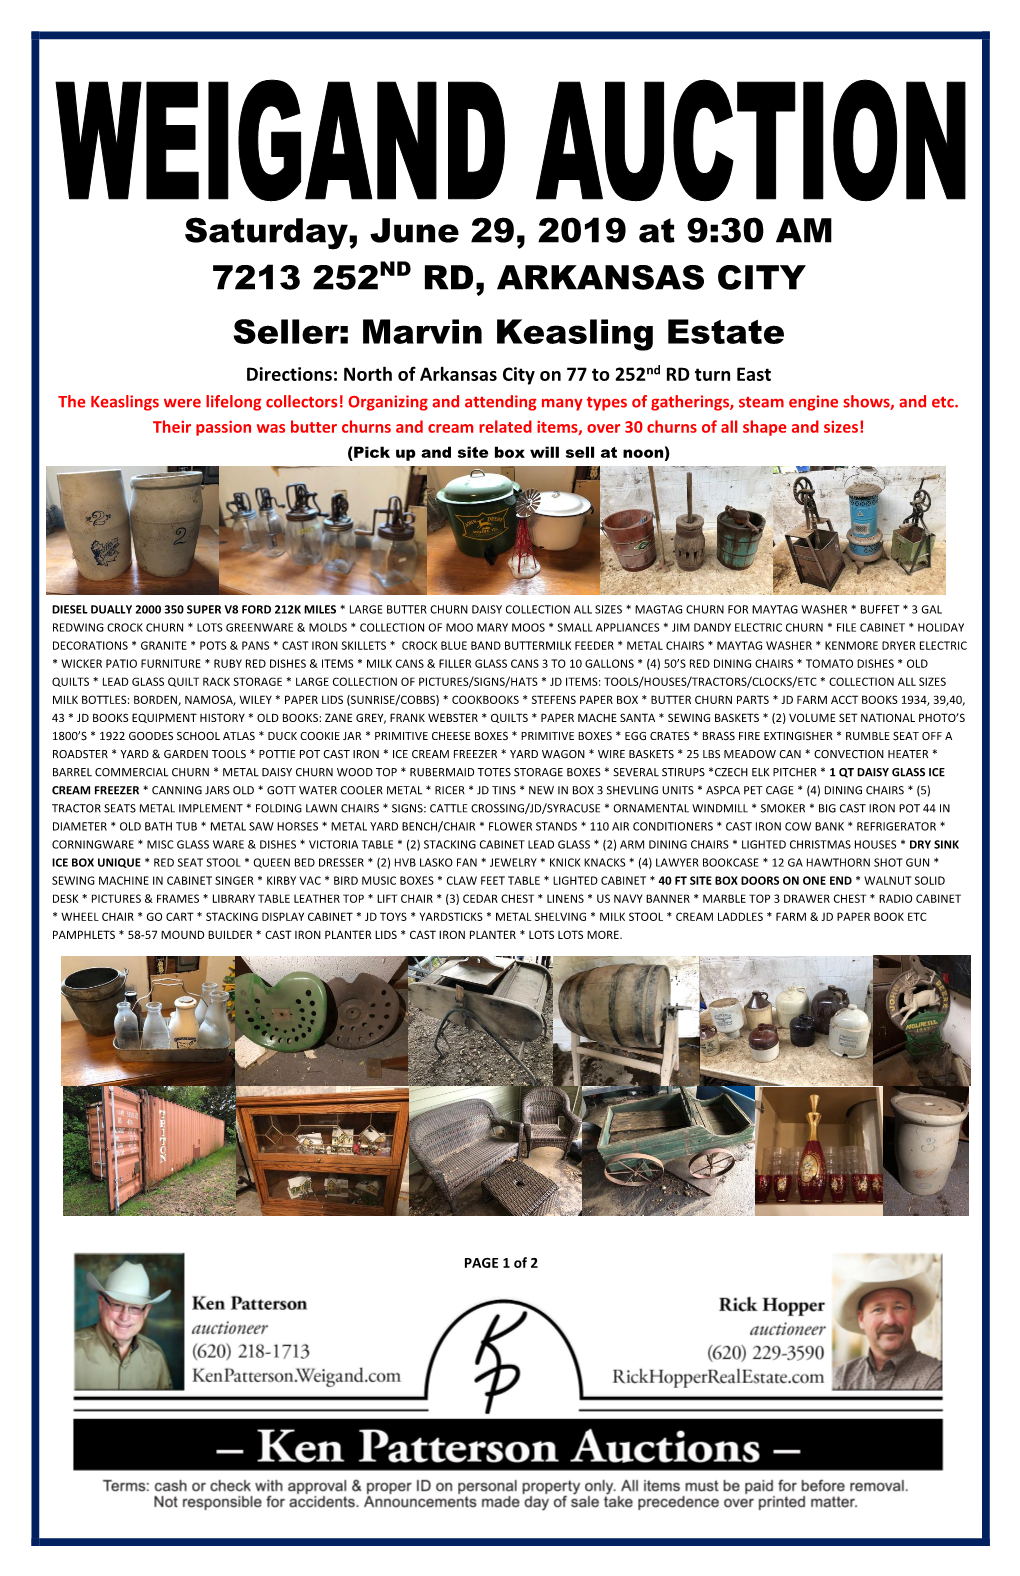 Marvin Keasling Estate Directions: North of Arkansas City on 77 to 252Nd RD Turn East